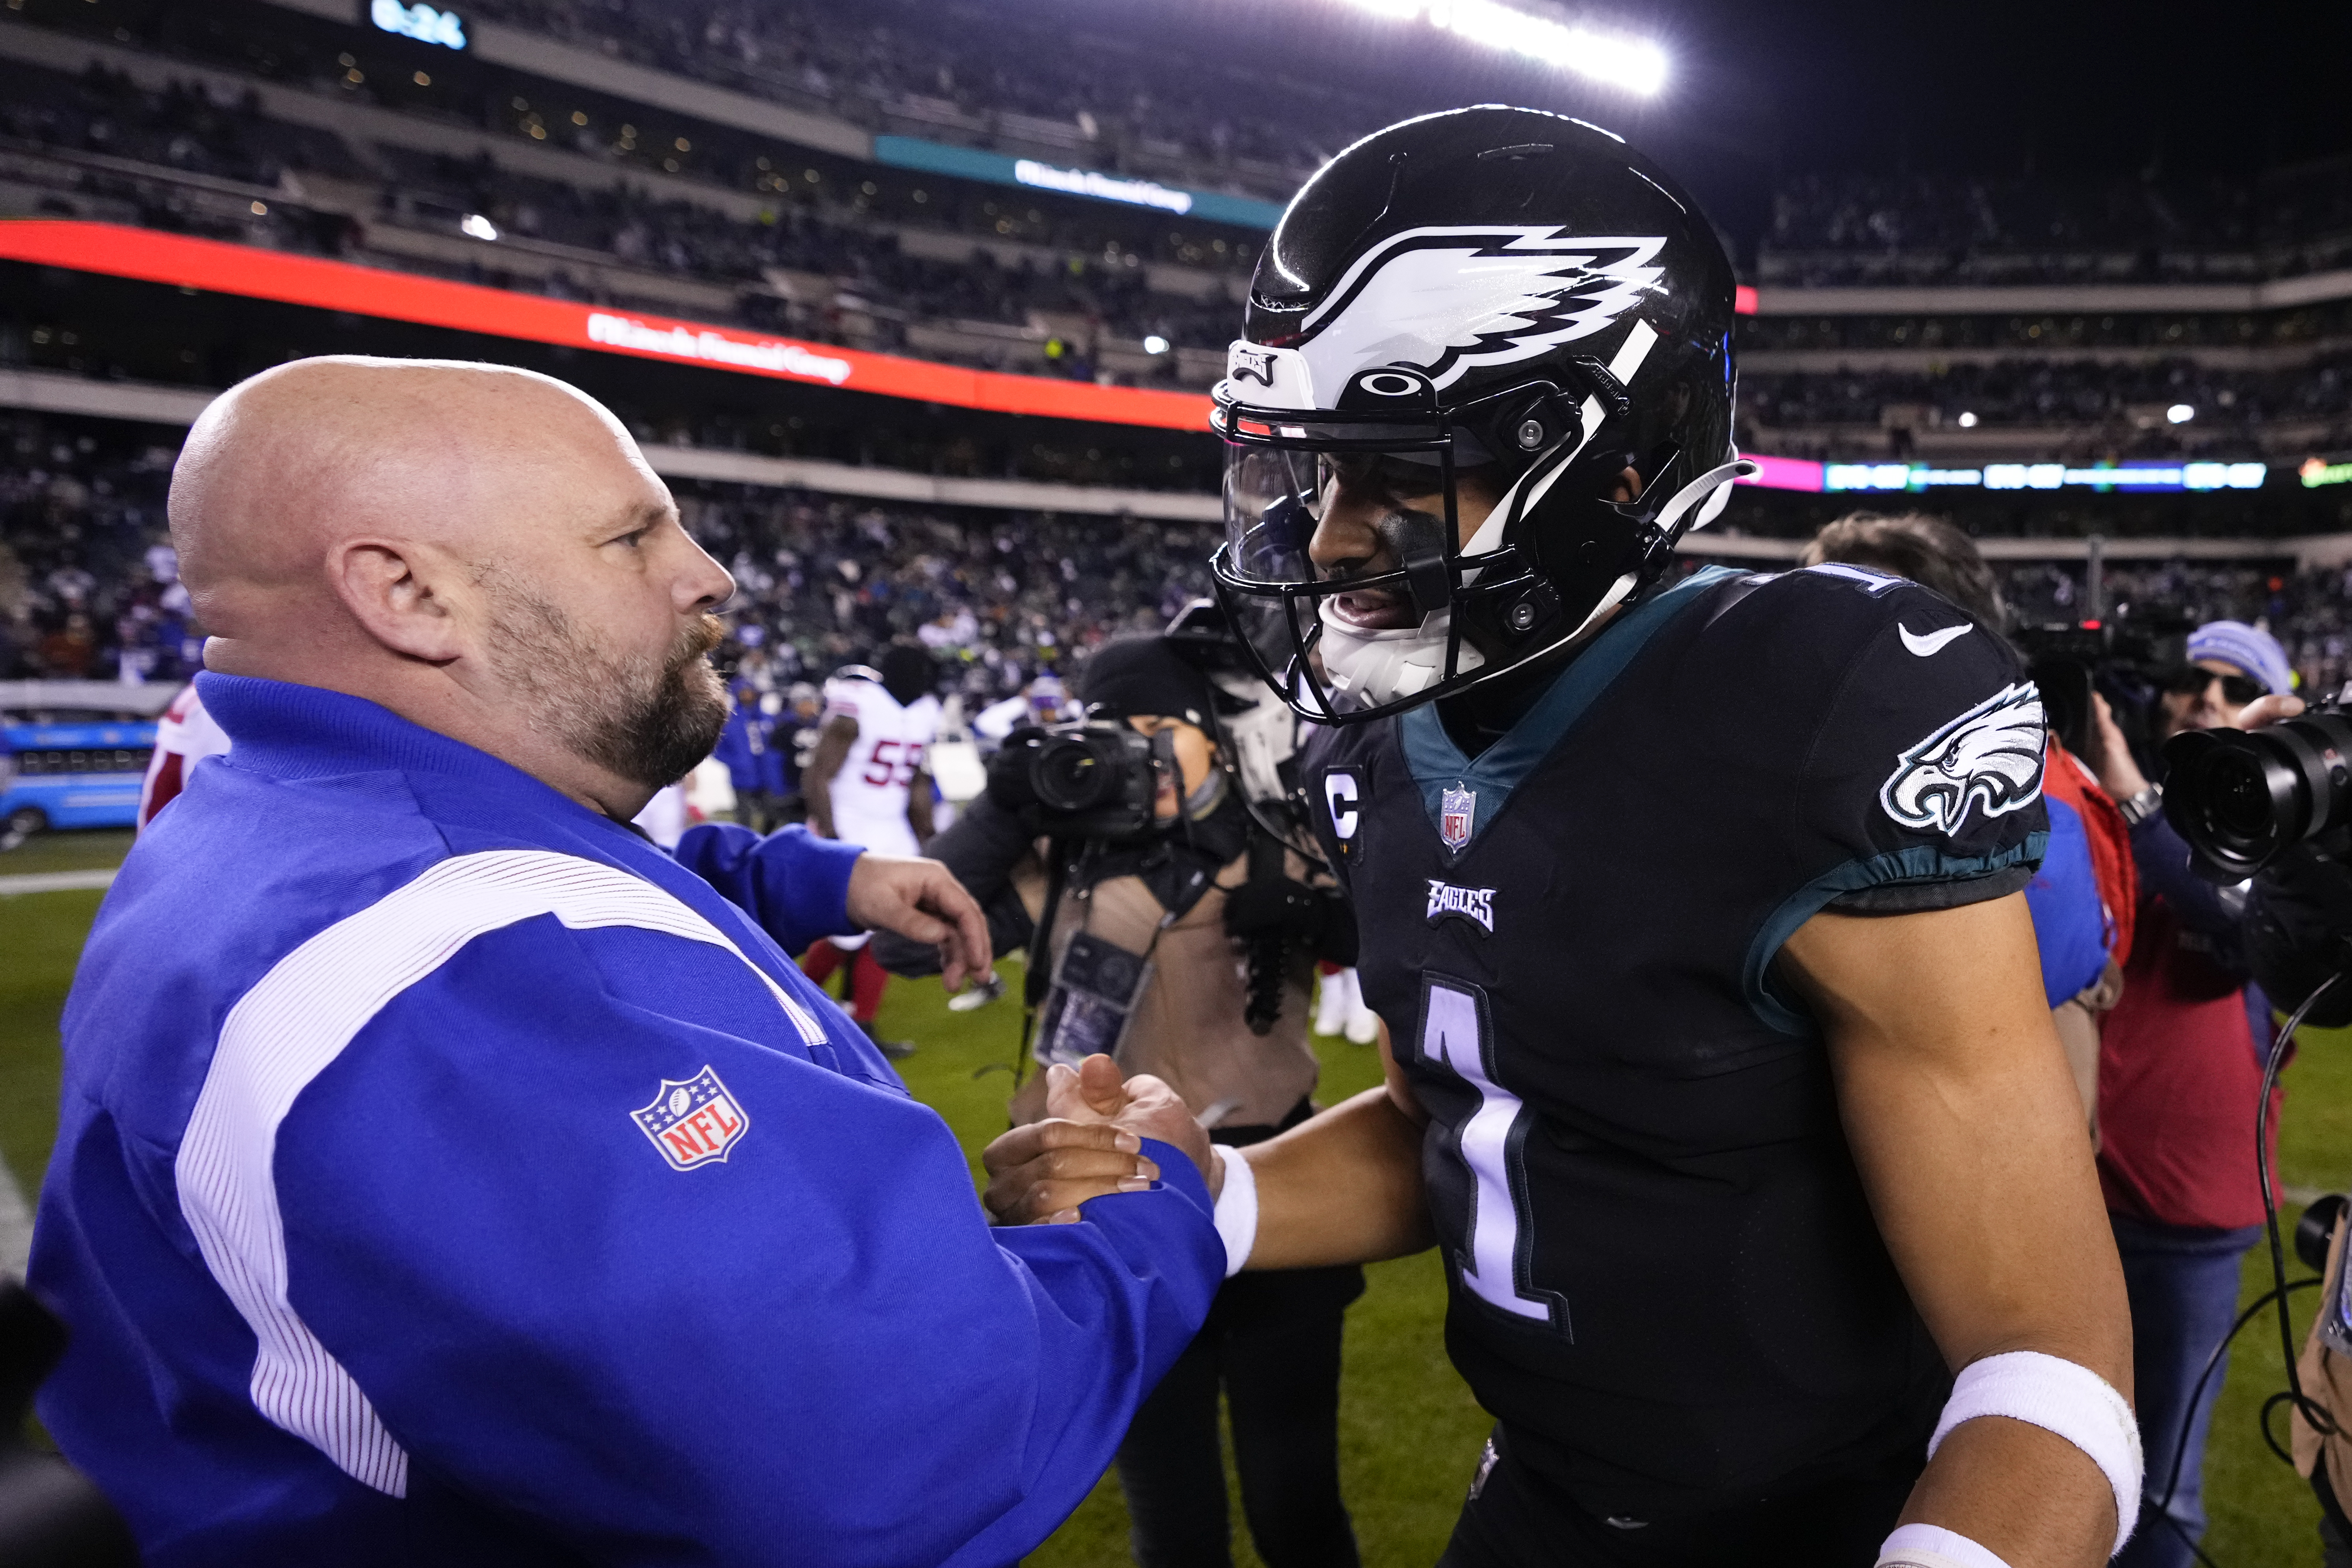 Hurts, Eagles clinch playoffs with 48-22 win over Giants